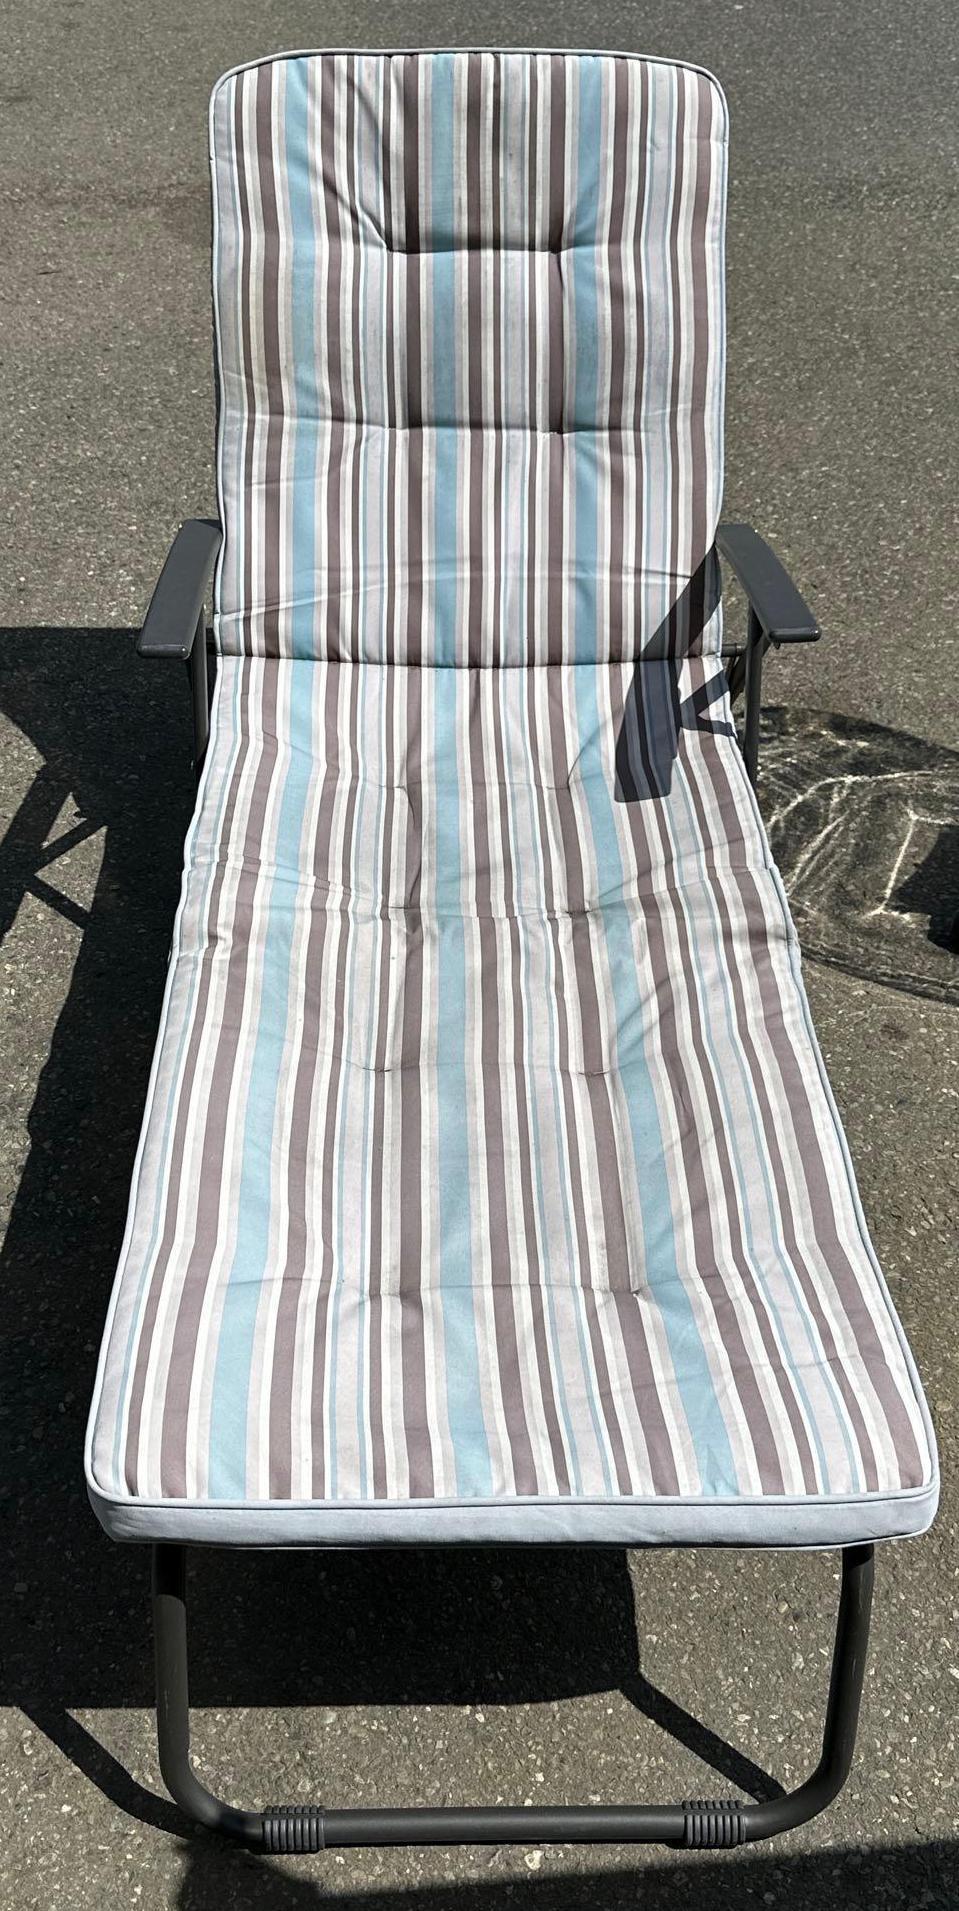 Adjustable Lawn Chair